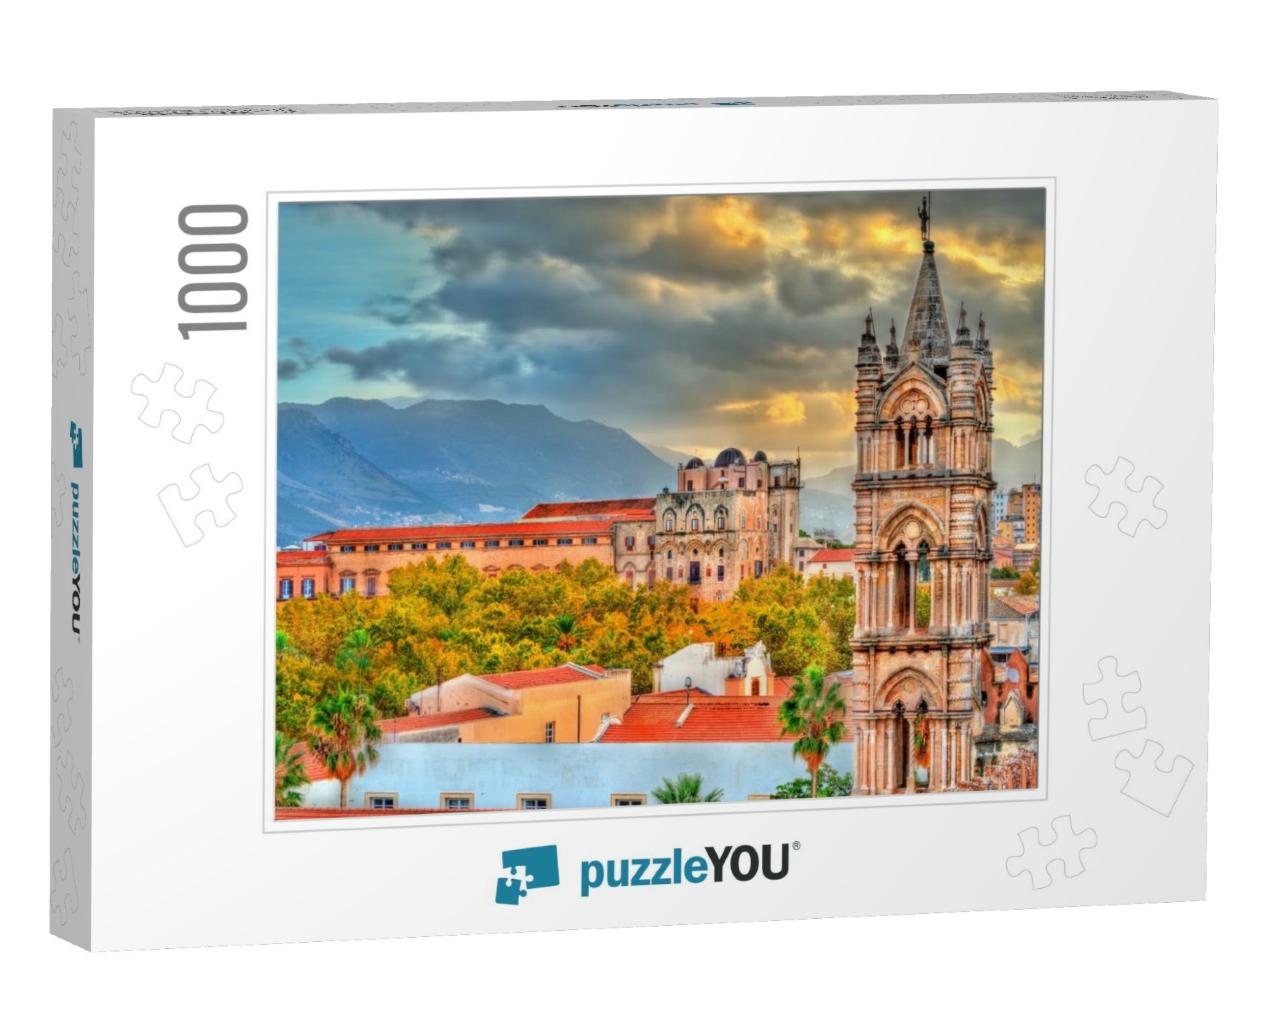 Tower of Palermo Cathedral & Palazzo Dei Normanni At Suns... Jigsaw Puzzle with 1000 pieces